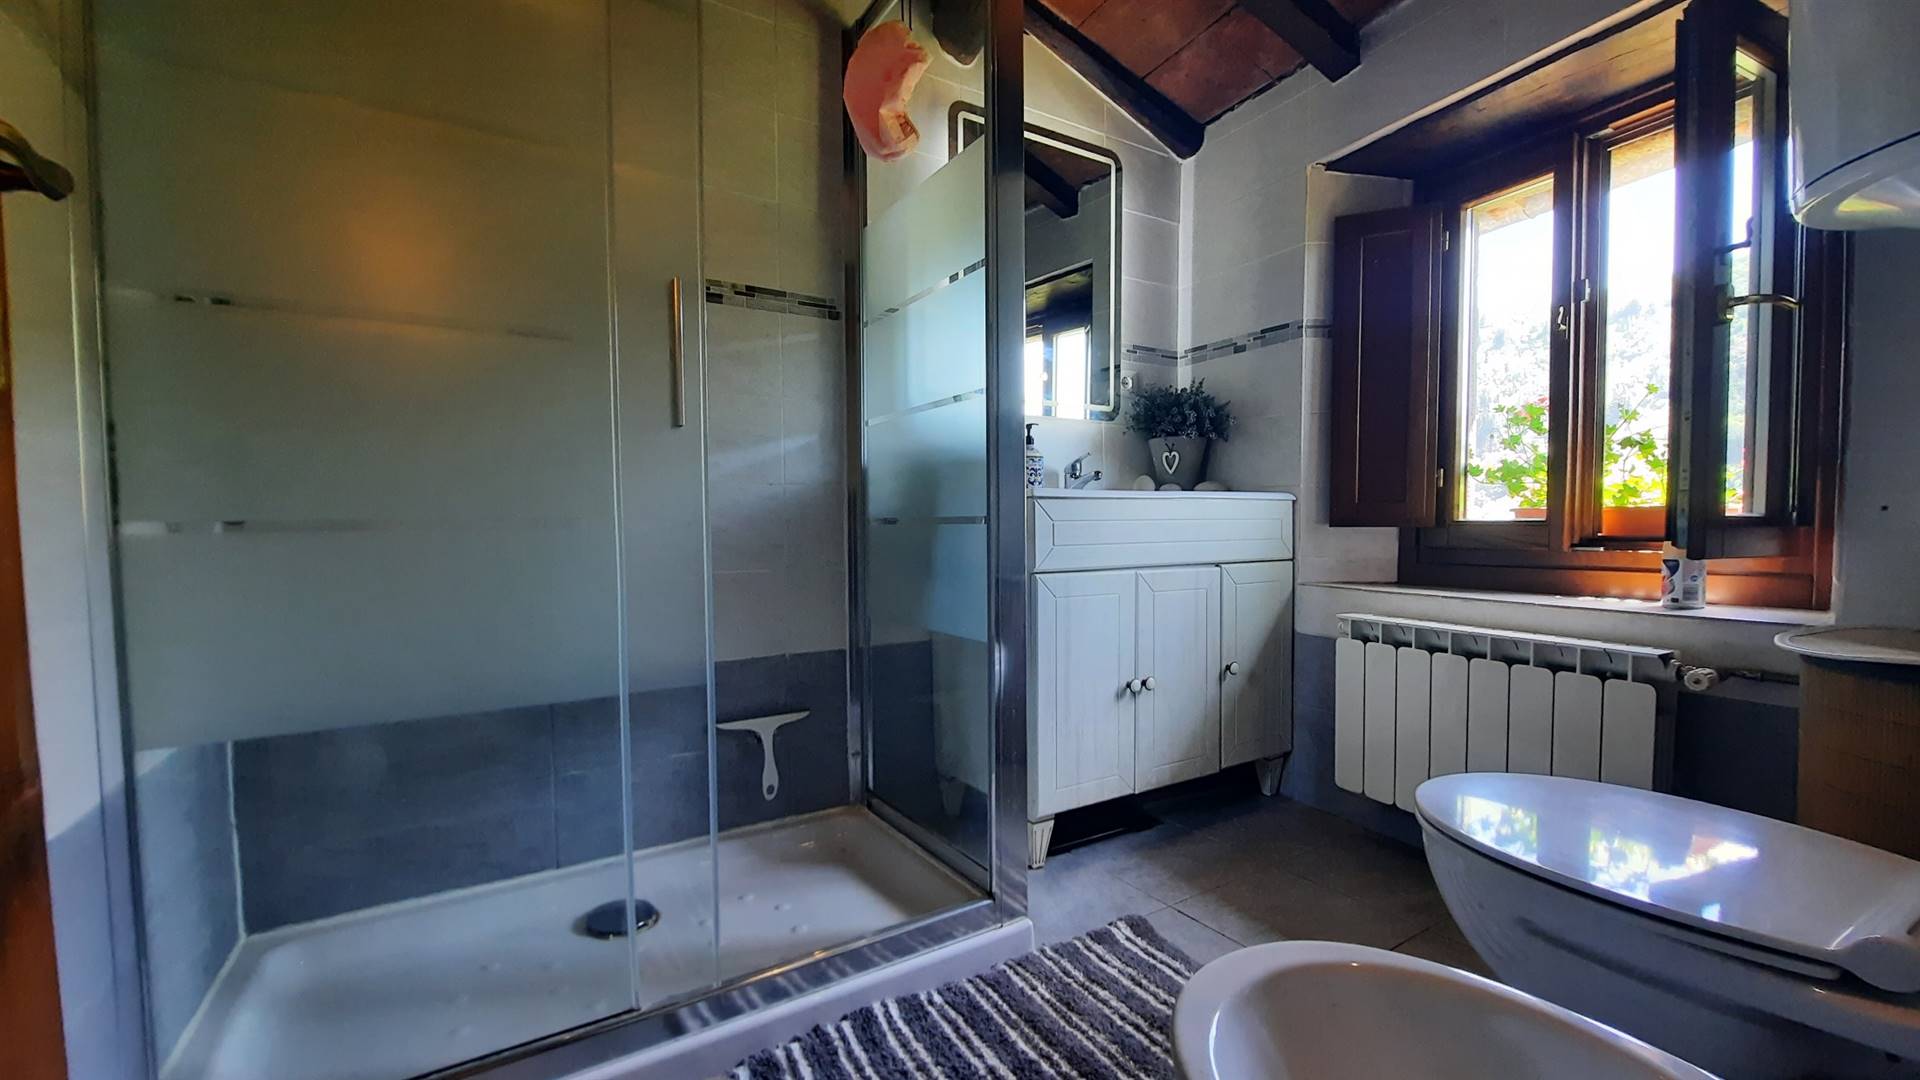 Il bagno alle camere - Bathroom to the bedrooms